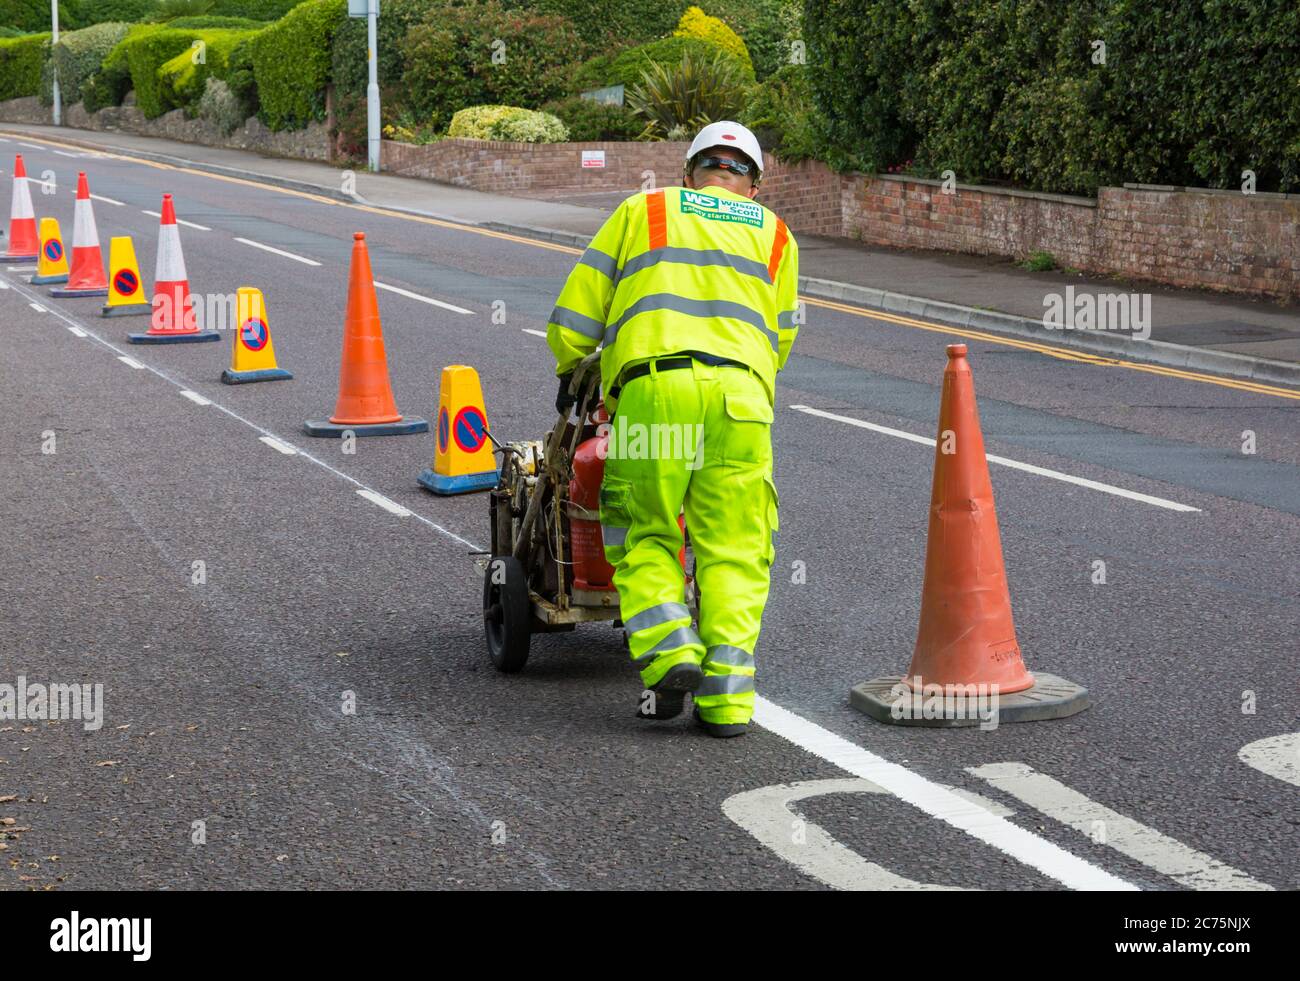 Painting white lines for new trial cycle lane at Evening Hill, Sandbanks, Poole, Dorset UK in July Stock Photo